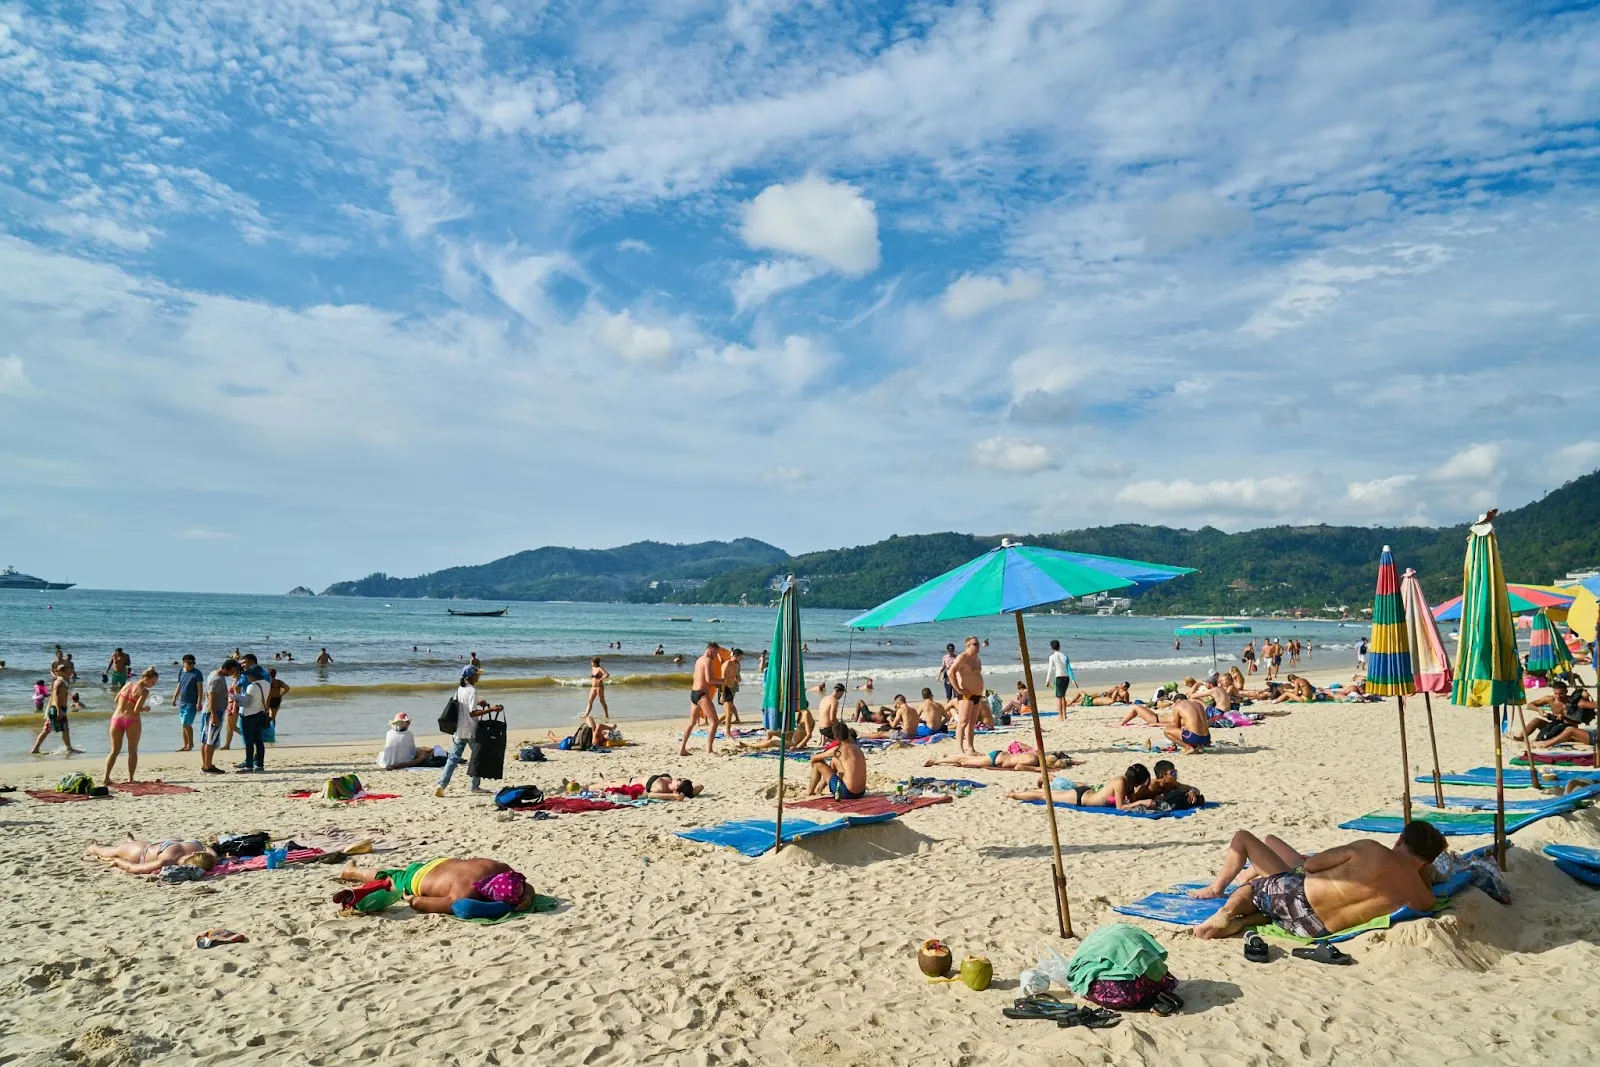 The crowded beach with tourists at Koh Lanta